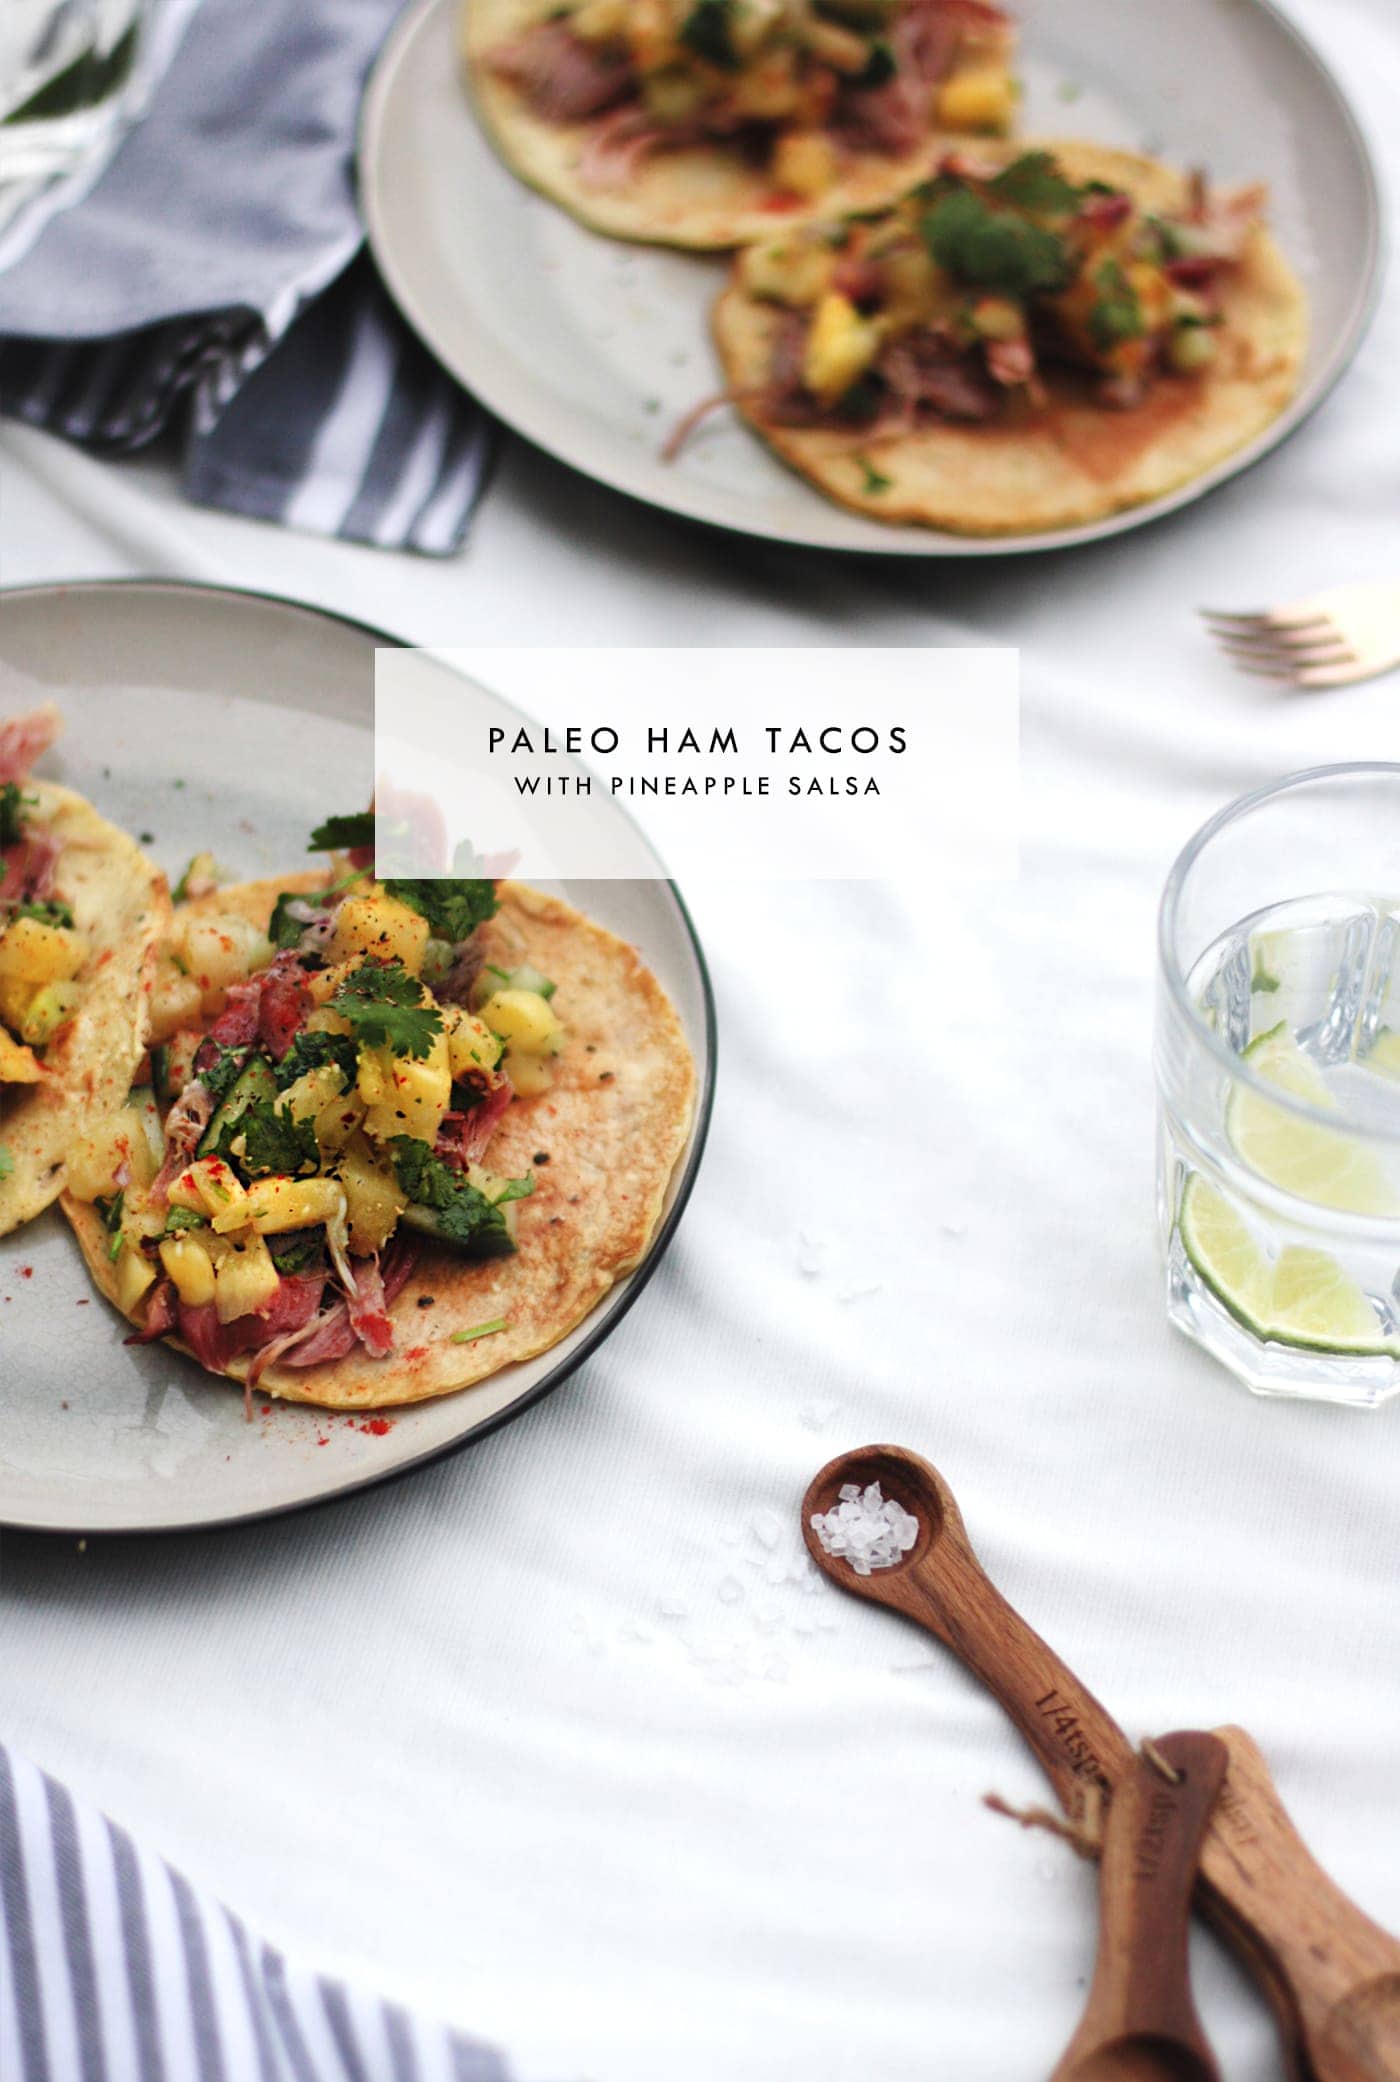 Paleo ham tortillas with pineapple salsa | gluten free | grain free | dairy free | perfect for a summer evening